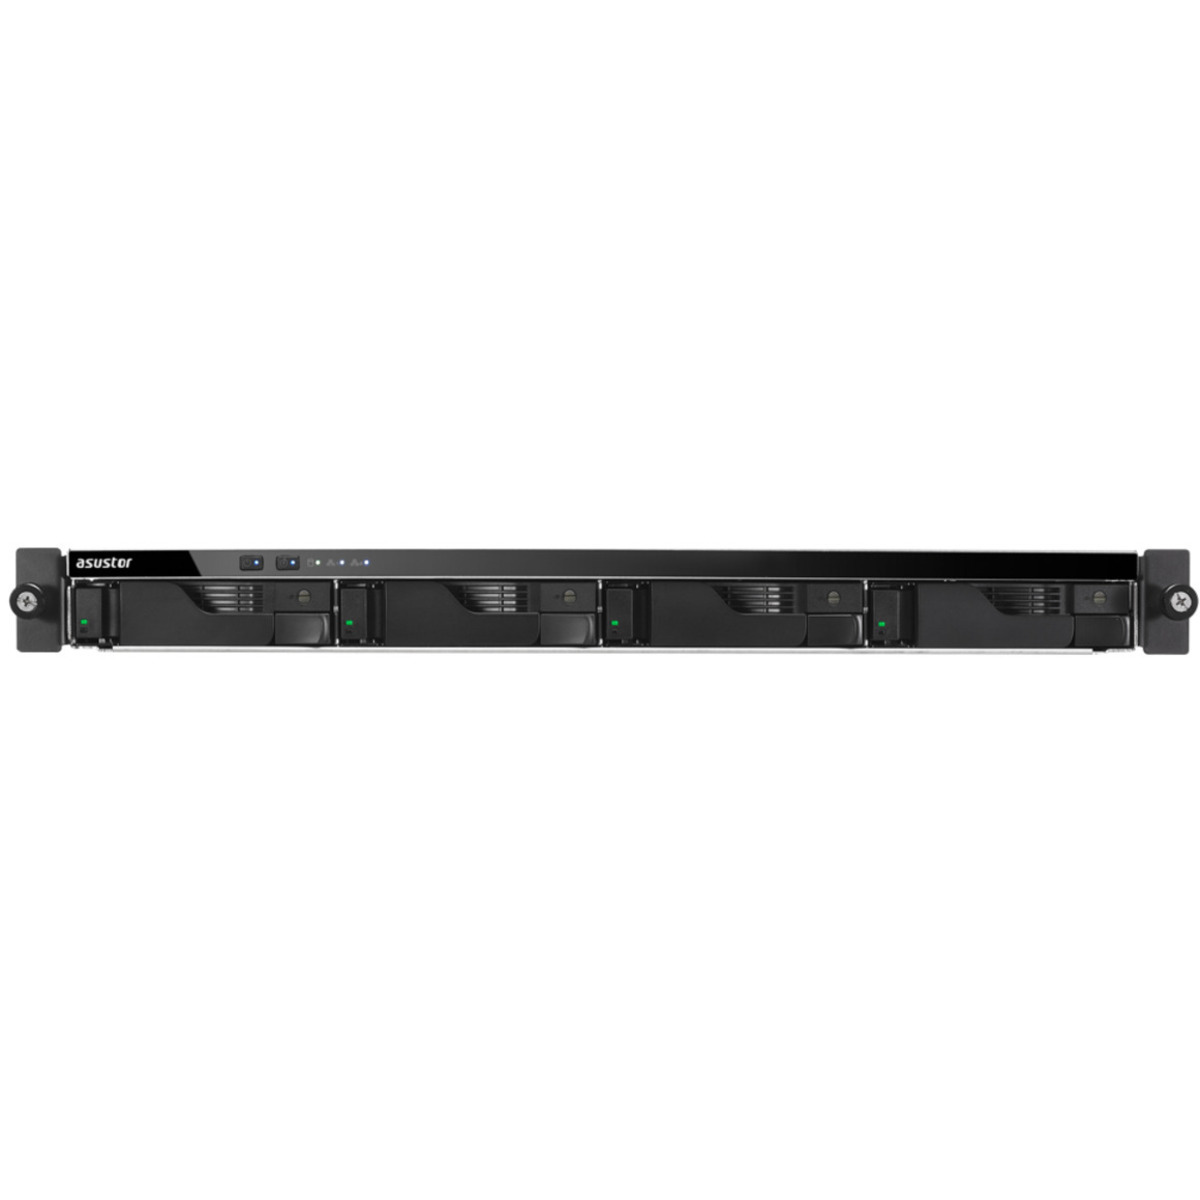 ASUSTOR LOCKERSTOR 4RS AS6504RS 24tb 4-Bay RackMount Multimedia / Power User / Business NAS - Network Attached Storage Device 4x6tb Western Digital Red Pro WD6003FFBX 3.5 7200rpm SATA 6Gb/s HDD NAS Class Drives Installed - Burn-In Tested - FREE RAM UPGRADE LOCKERSTOR 4RS AS6504RS